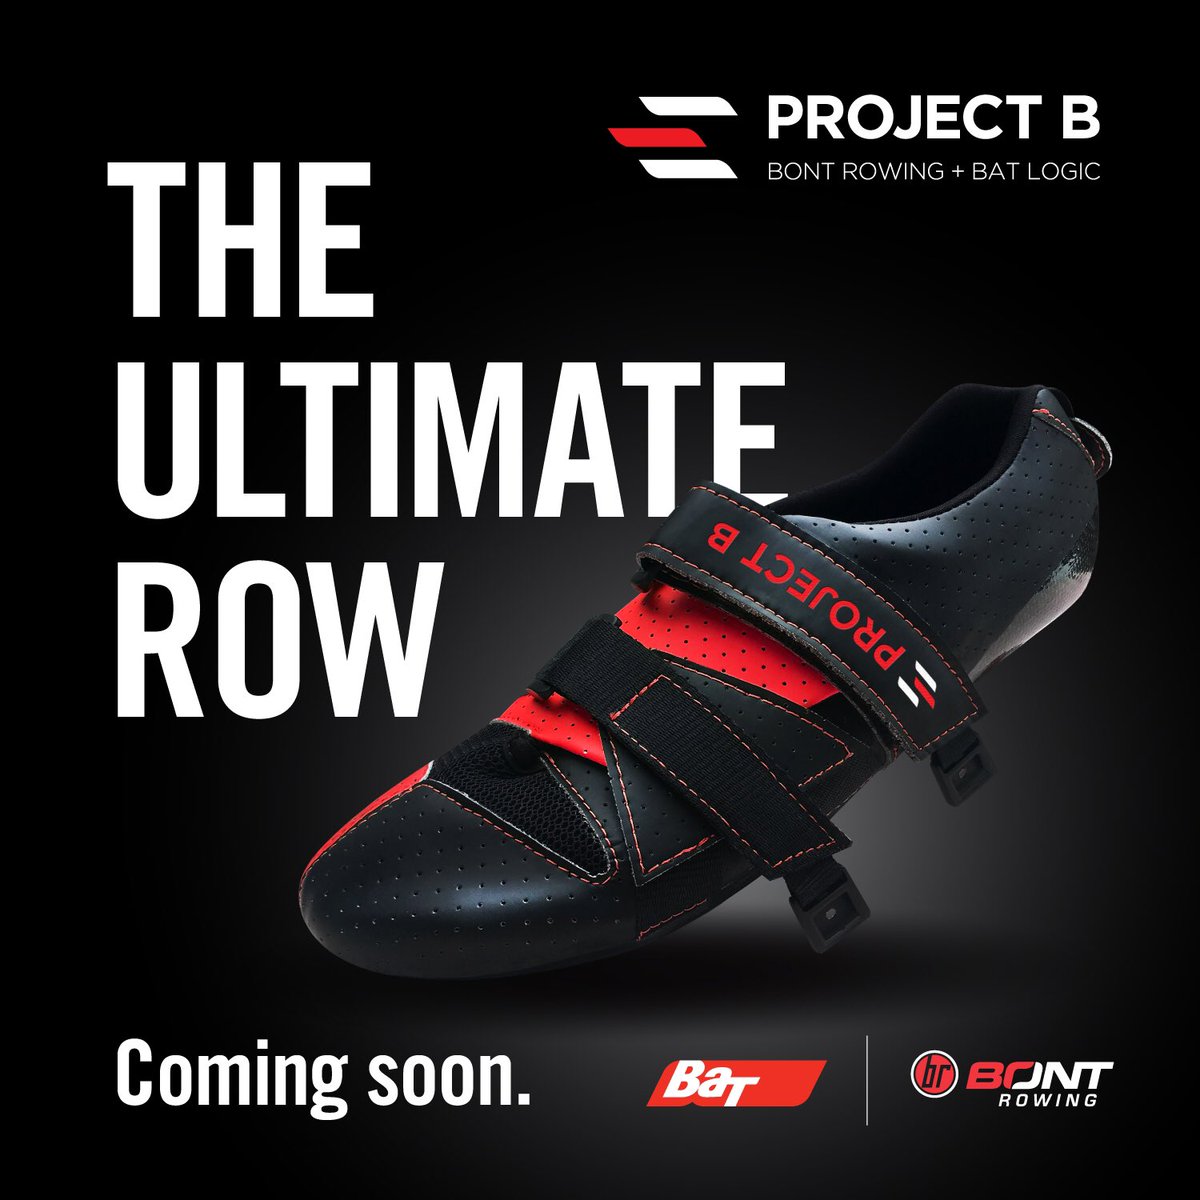 Bont Rowing Project B A Collaboration Between Bont Rowing Bat Logic Setting Standards For Research And Innovation Rowing Aviron Sculling T Co Zs4bsj6v5j